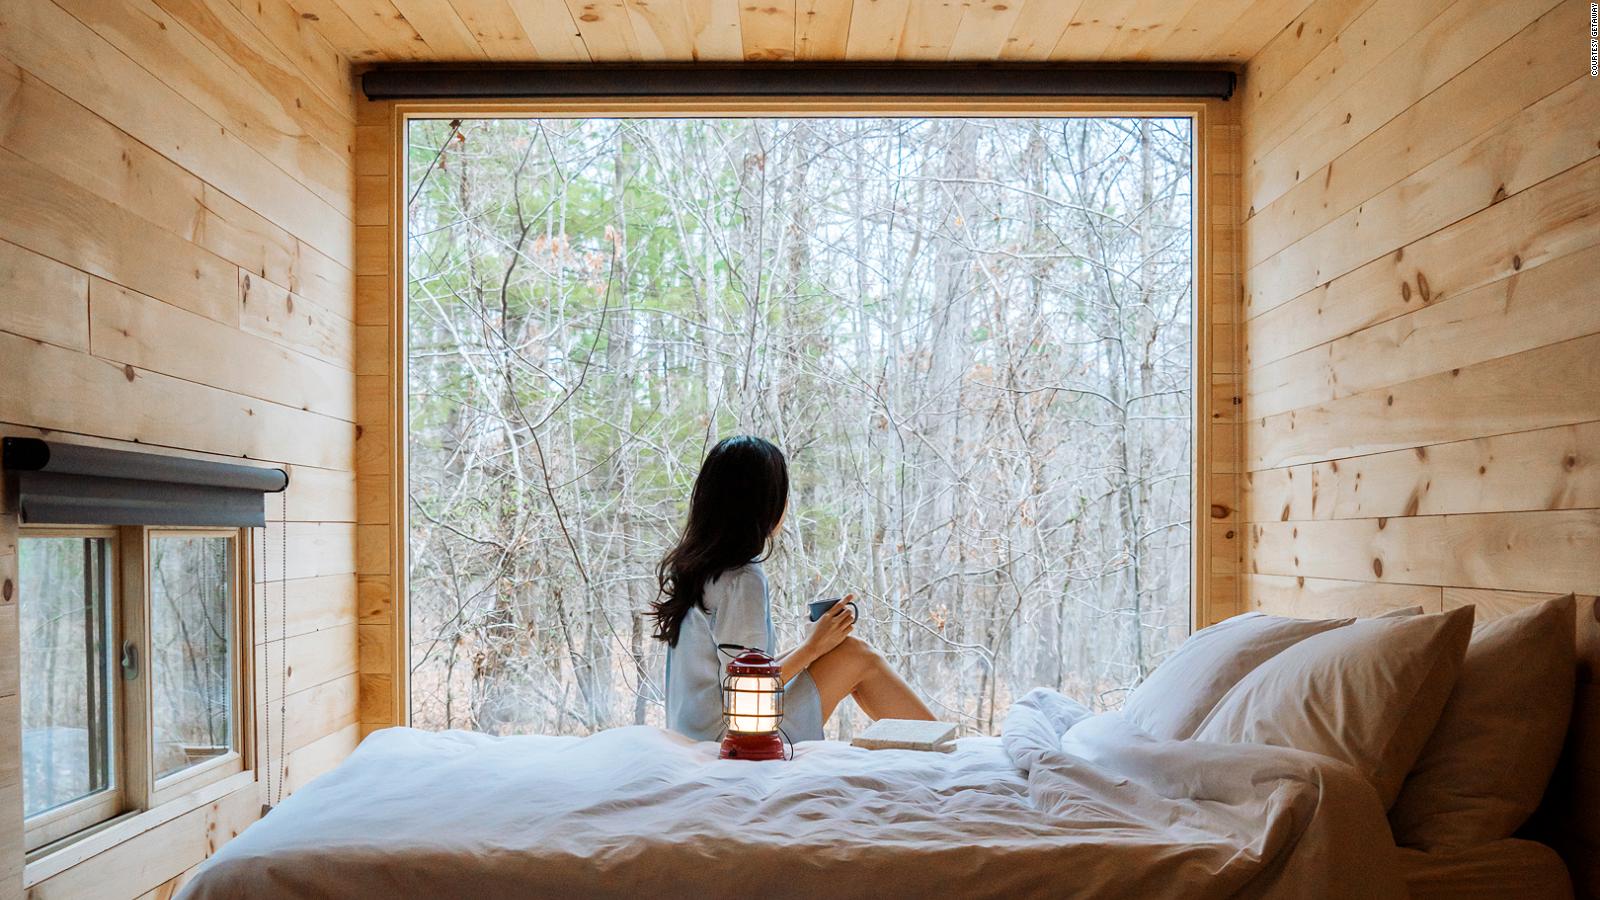 Tiny Getaway cabins become hot property for pandemic mini-vacations | CNN  Travel